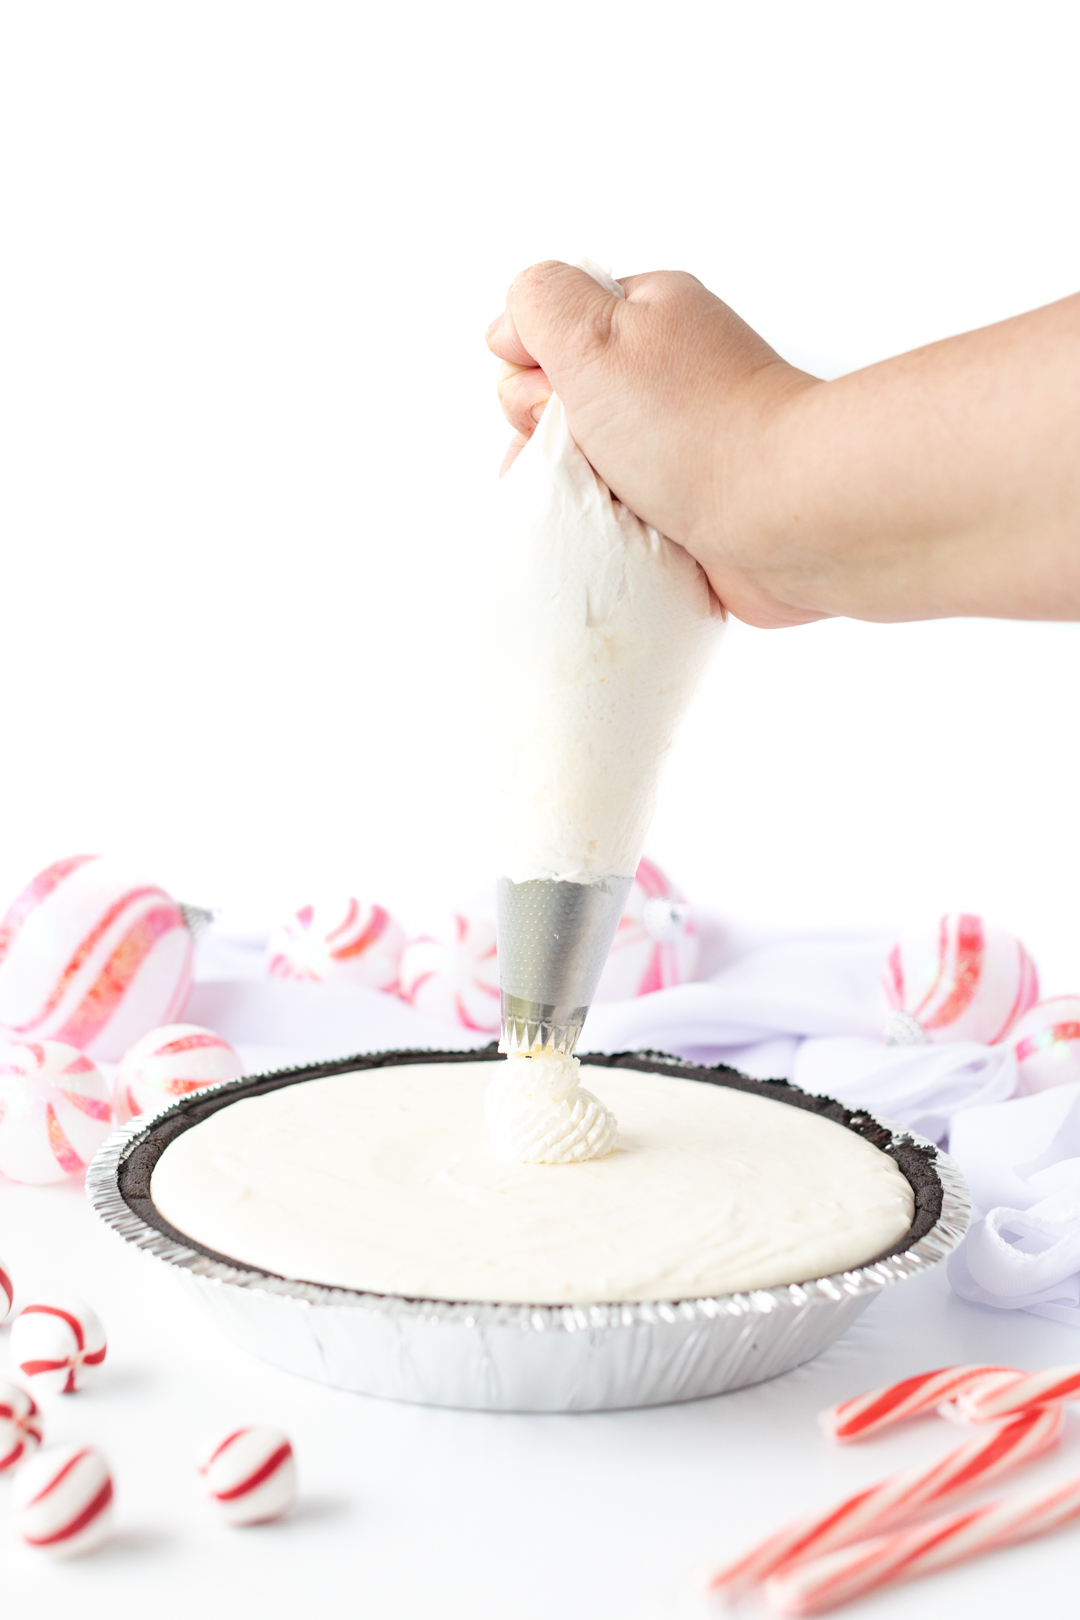 piping whipped topping onto a pie using a pastry bag